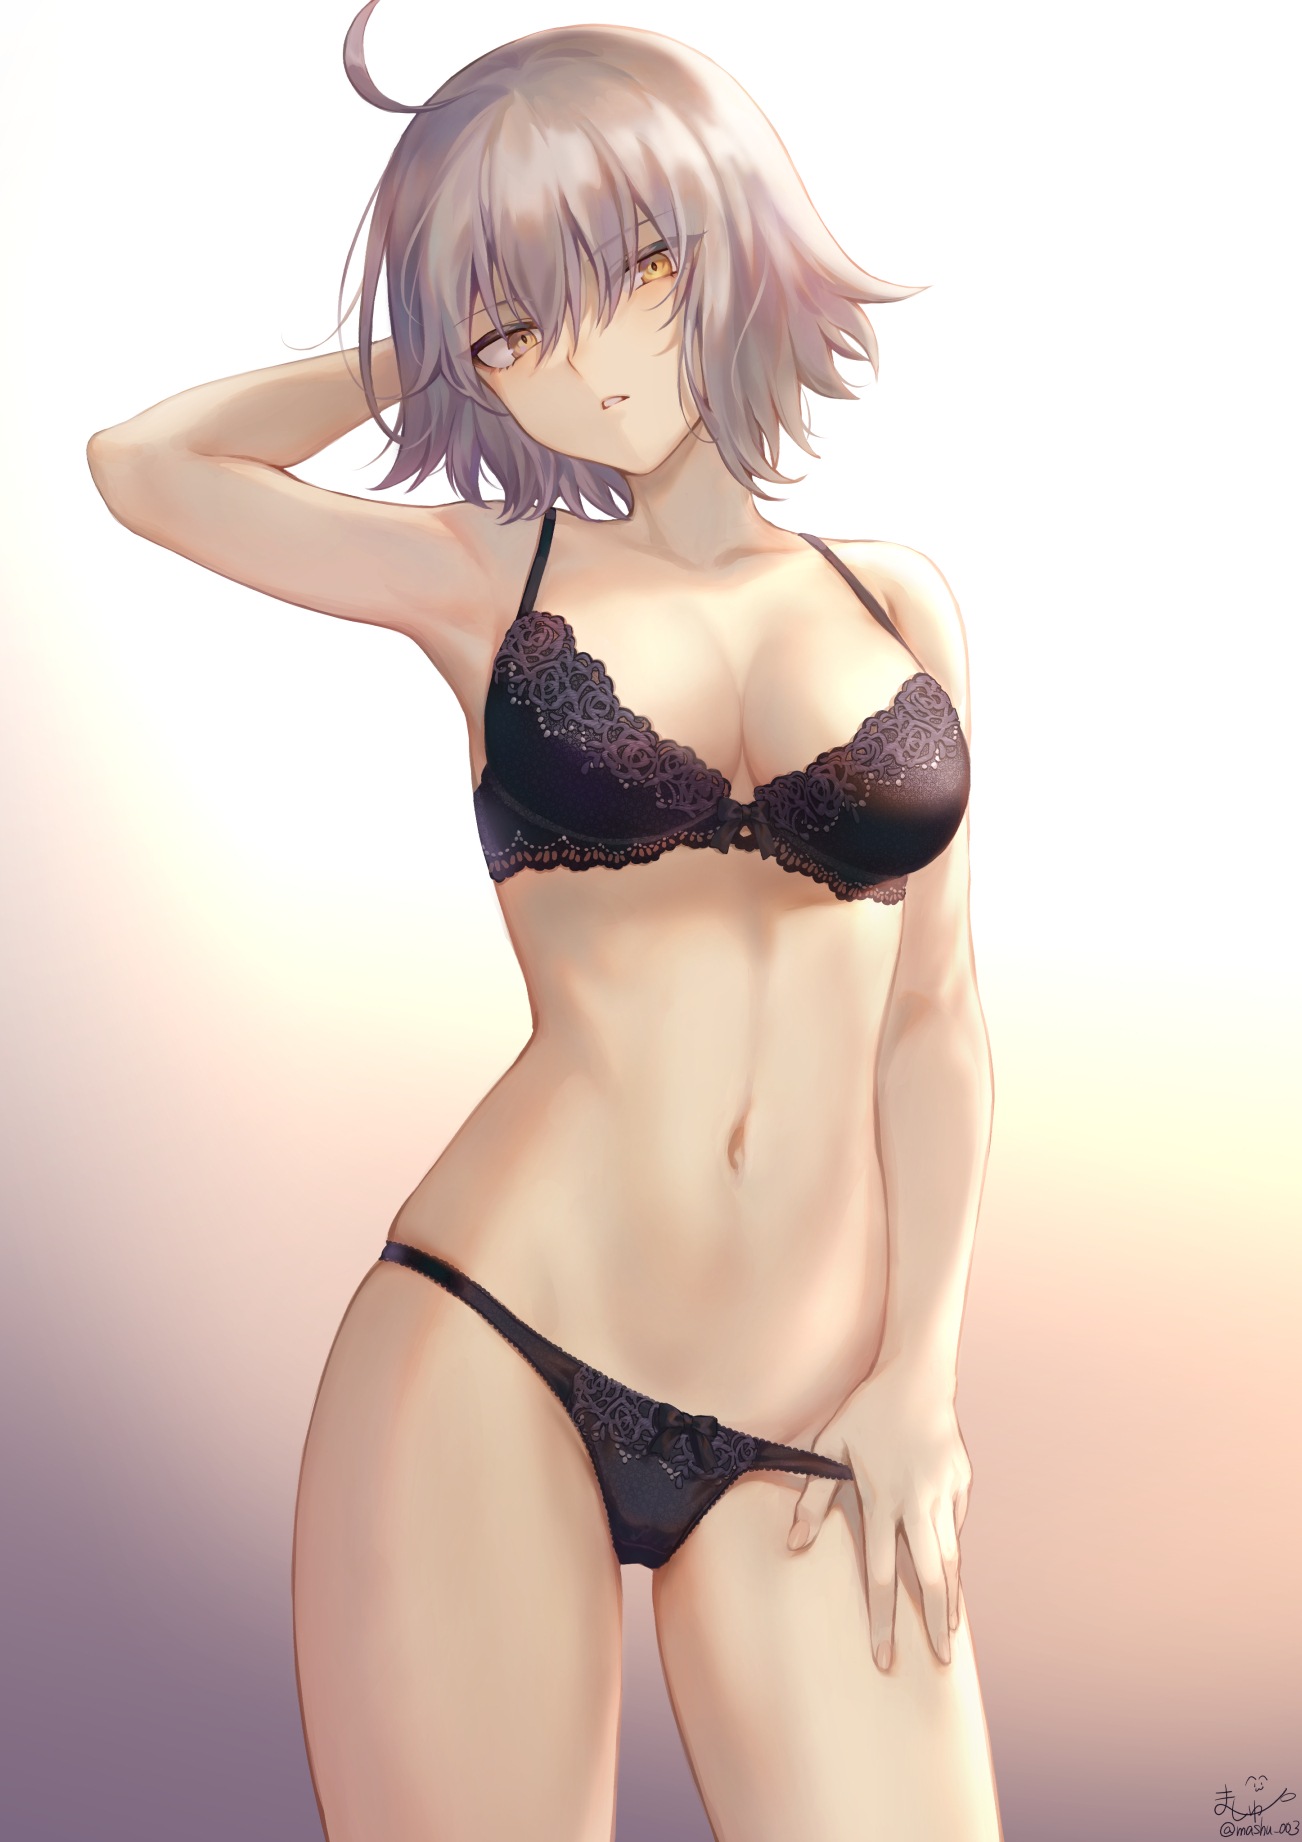 Naked Anime Lingerie - Sexy girls of anime posing in hot lingerie and stockings - 26 Pics | Hentai  City